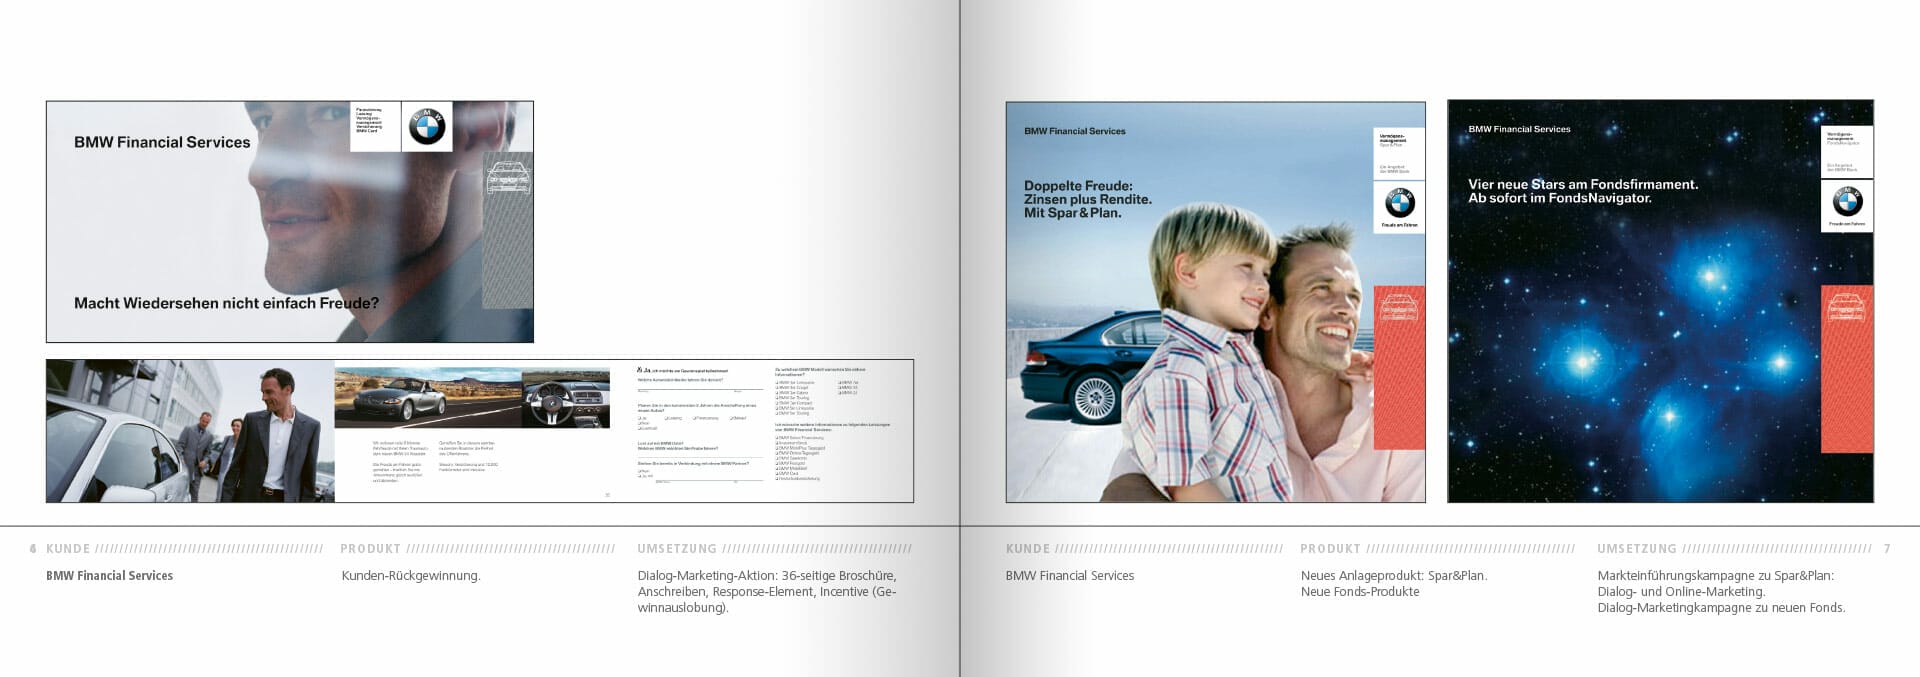 BMW Group Works 2001-2009 Booklet 6-7